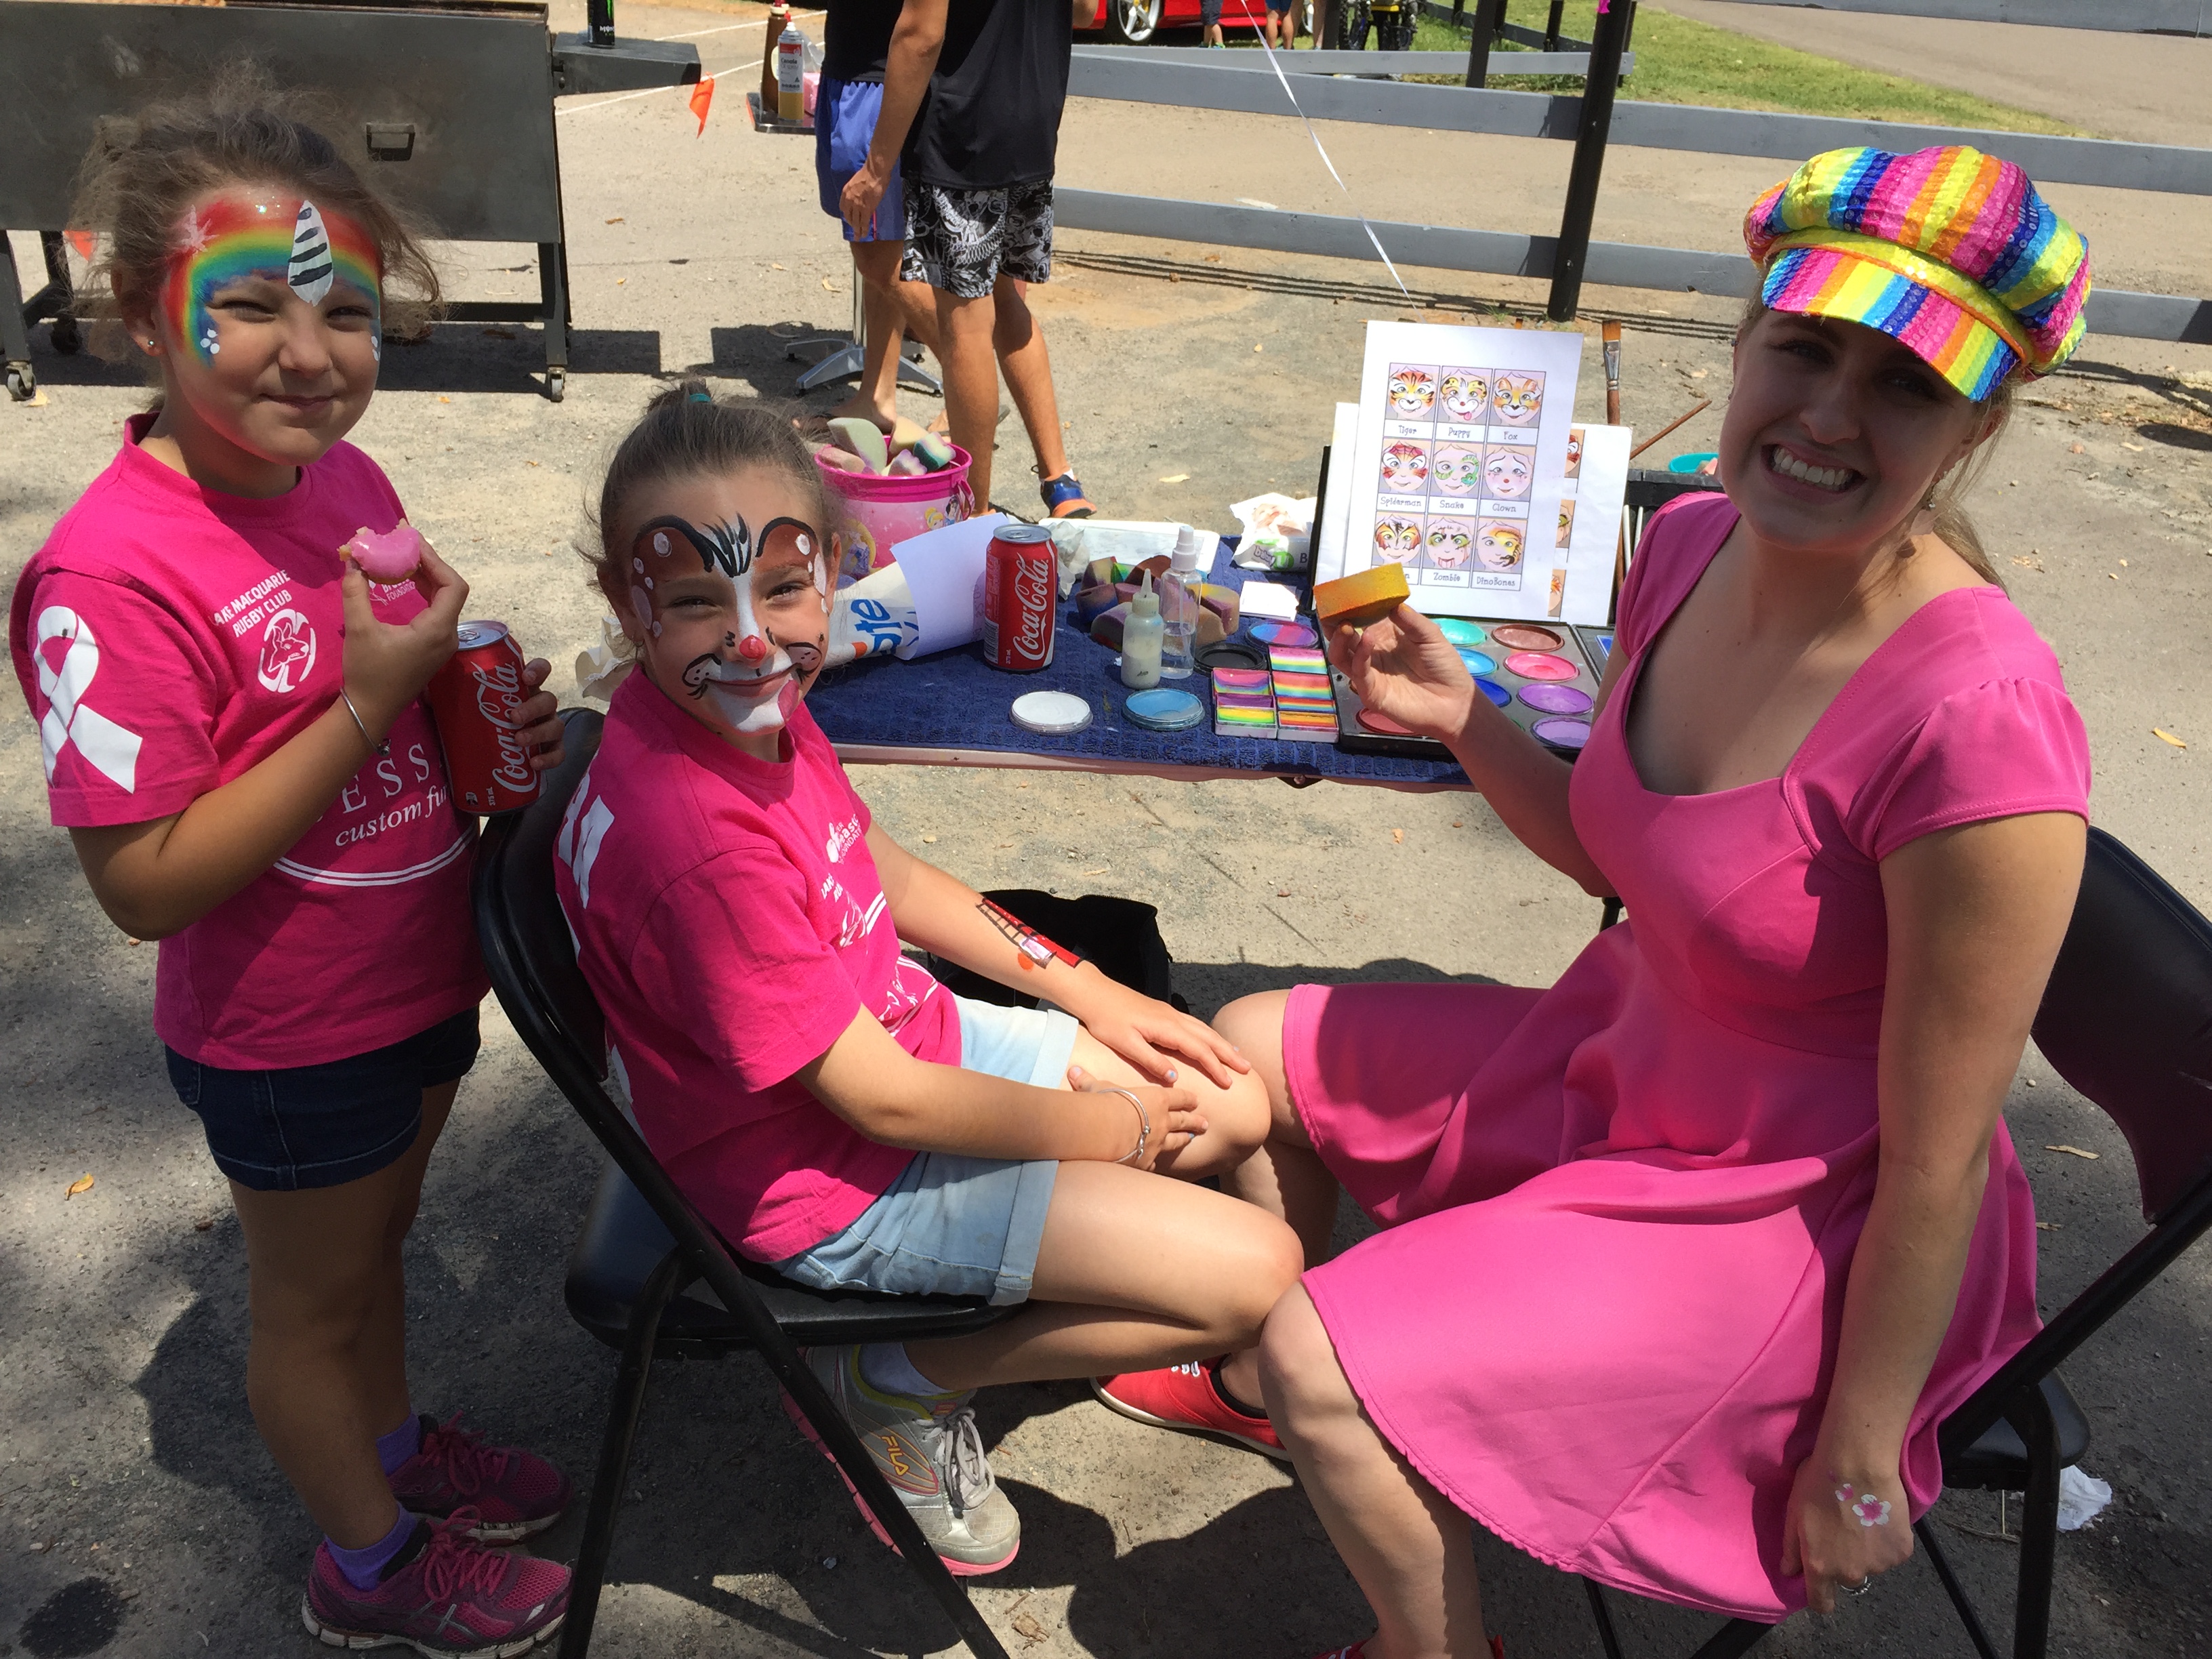 Face painting for the kids was a hit.